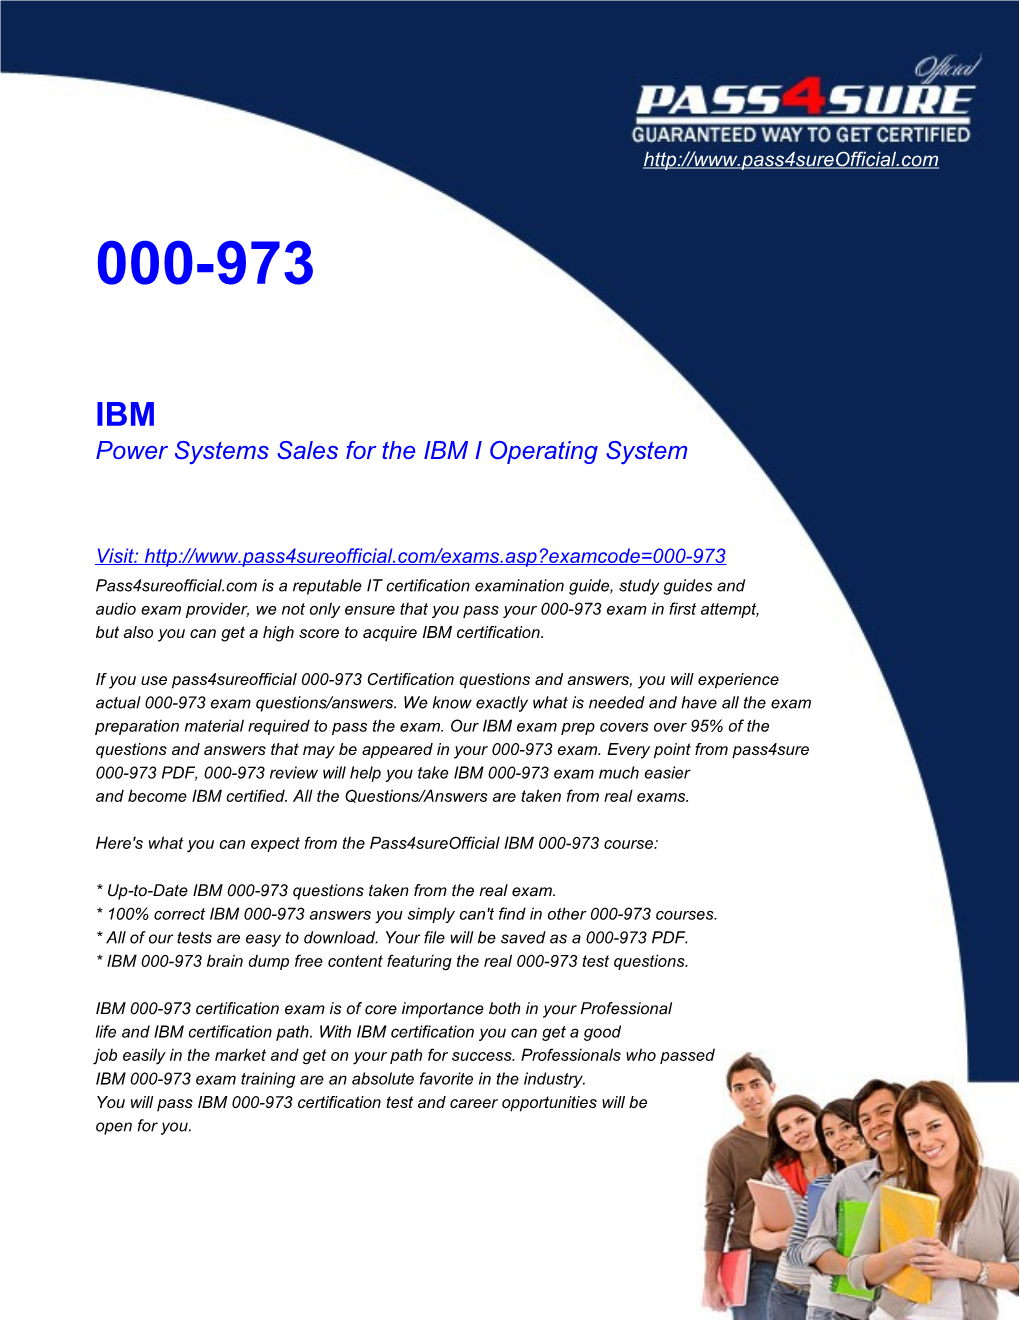 Power Systems Sales for the IBM I Operating System